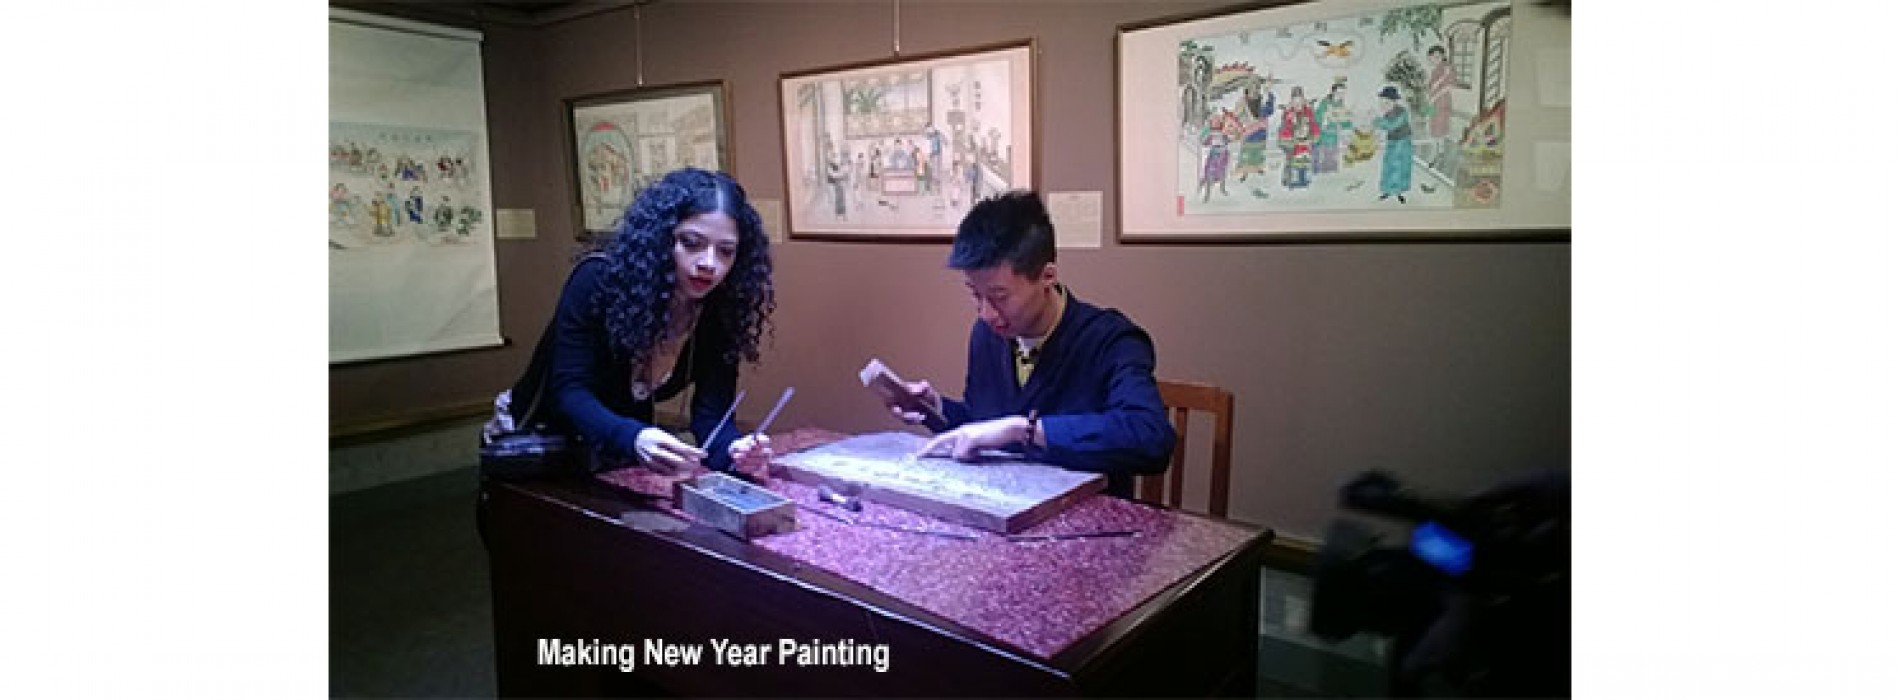 Yangliuqing New Year Painting: a unique art form of Chinese folk culture